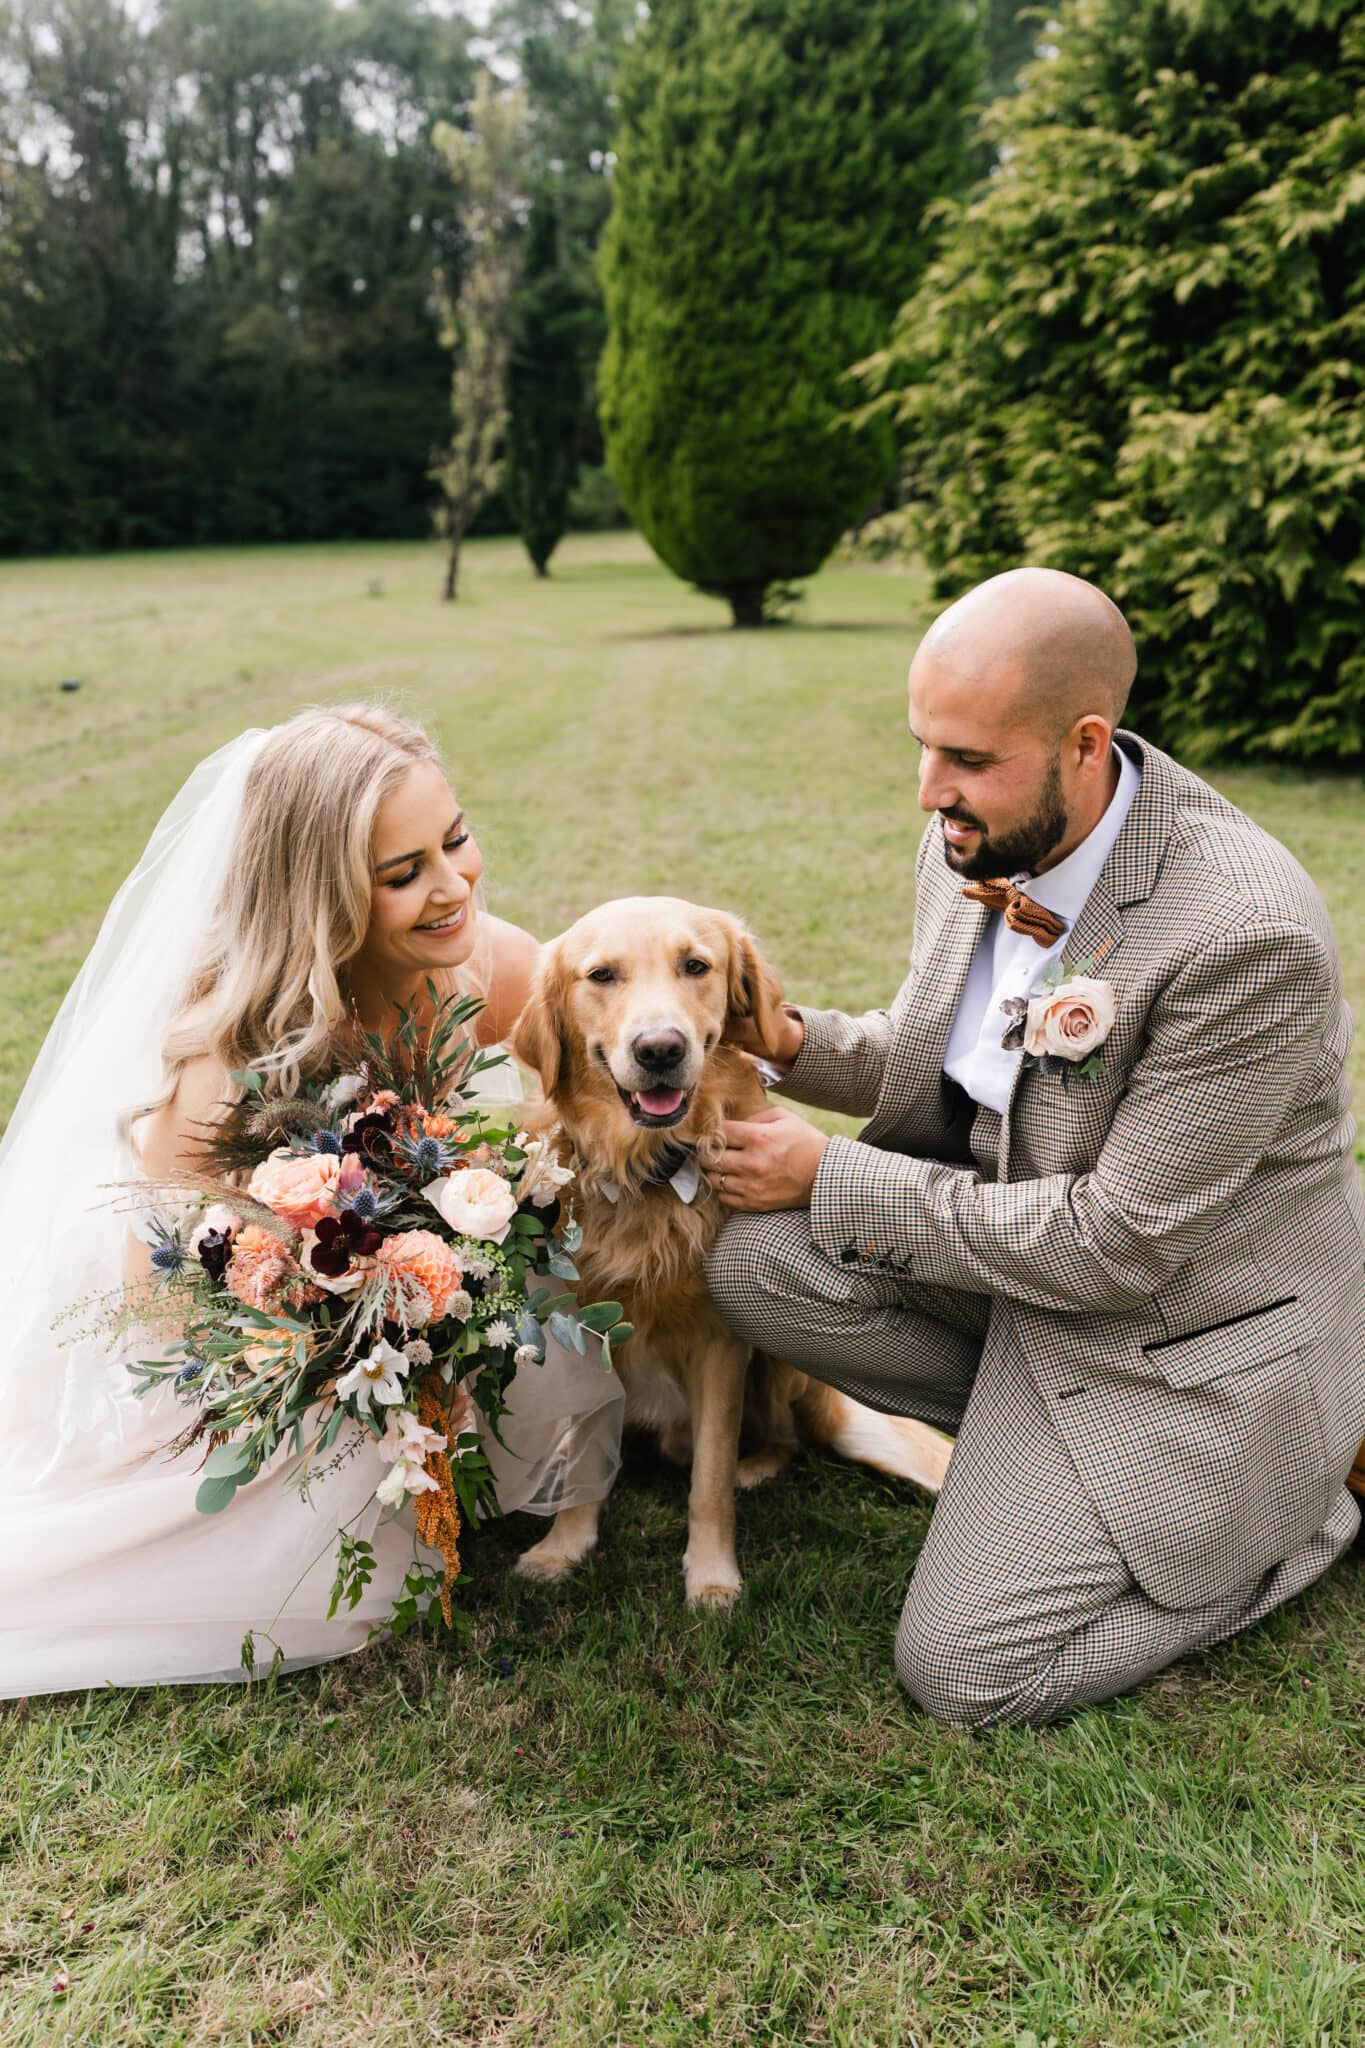 A bride and groom happily petting their golden retriever in a lush garden in South Wales, the bride holding a large floral bouquet, both dressed in wedding attire.